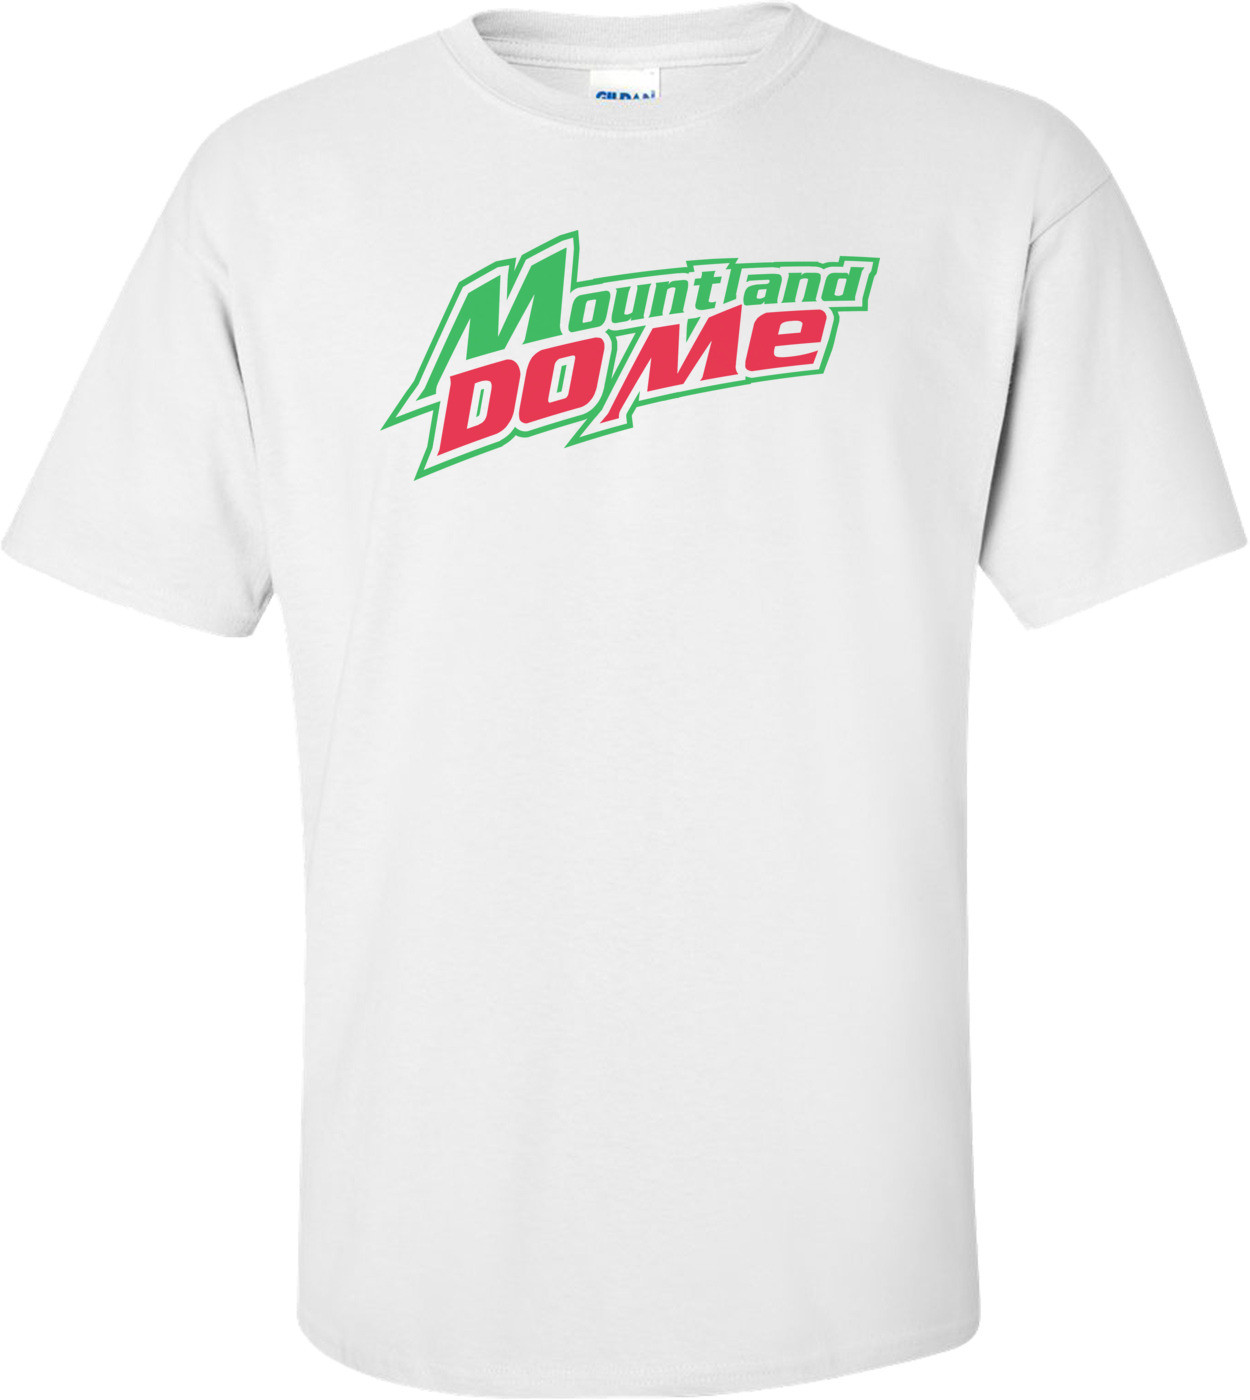 Mount And Do Me T-shirt